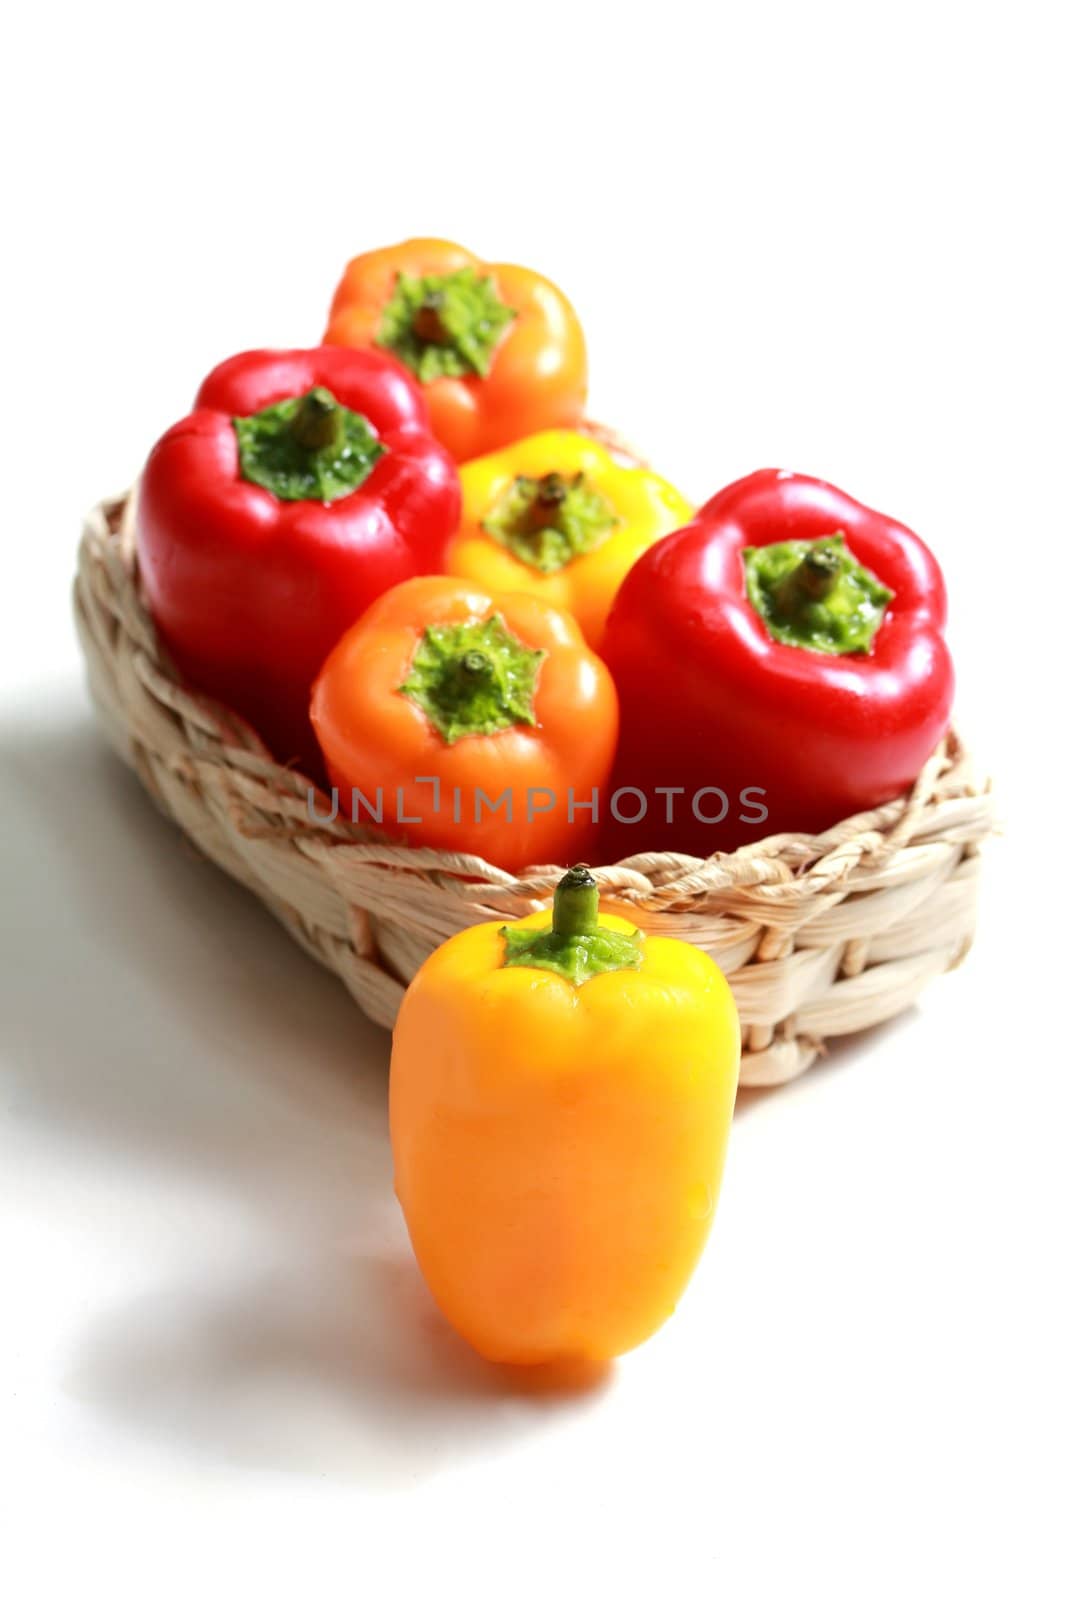 colorful mini paprika in a woven basket